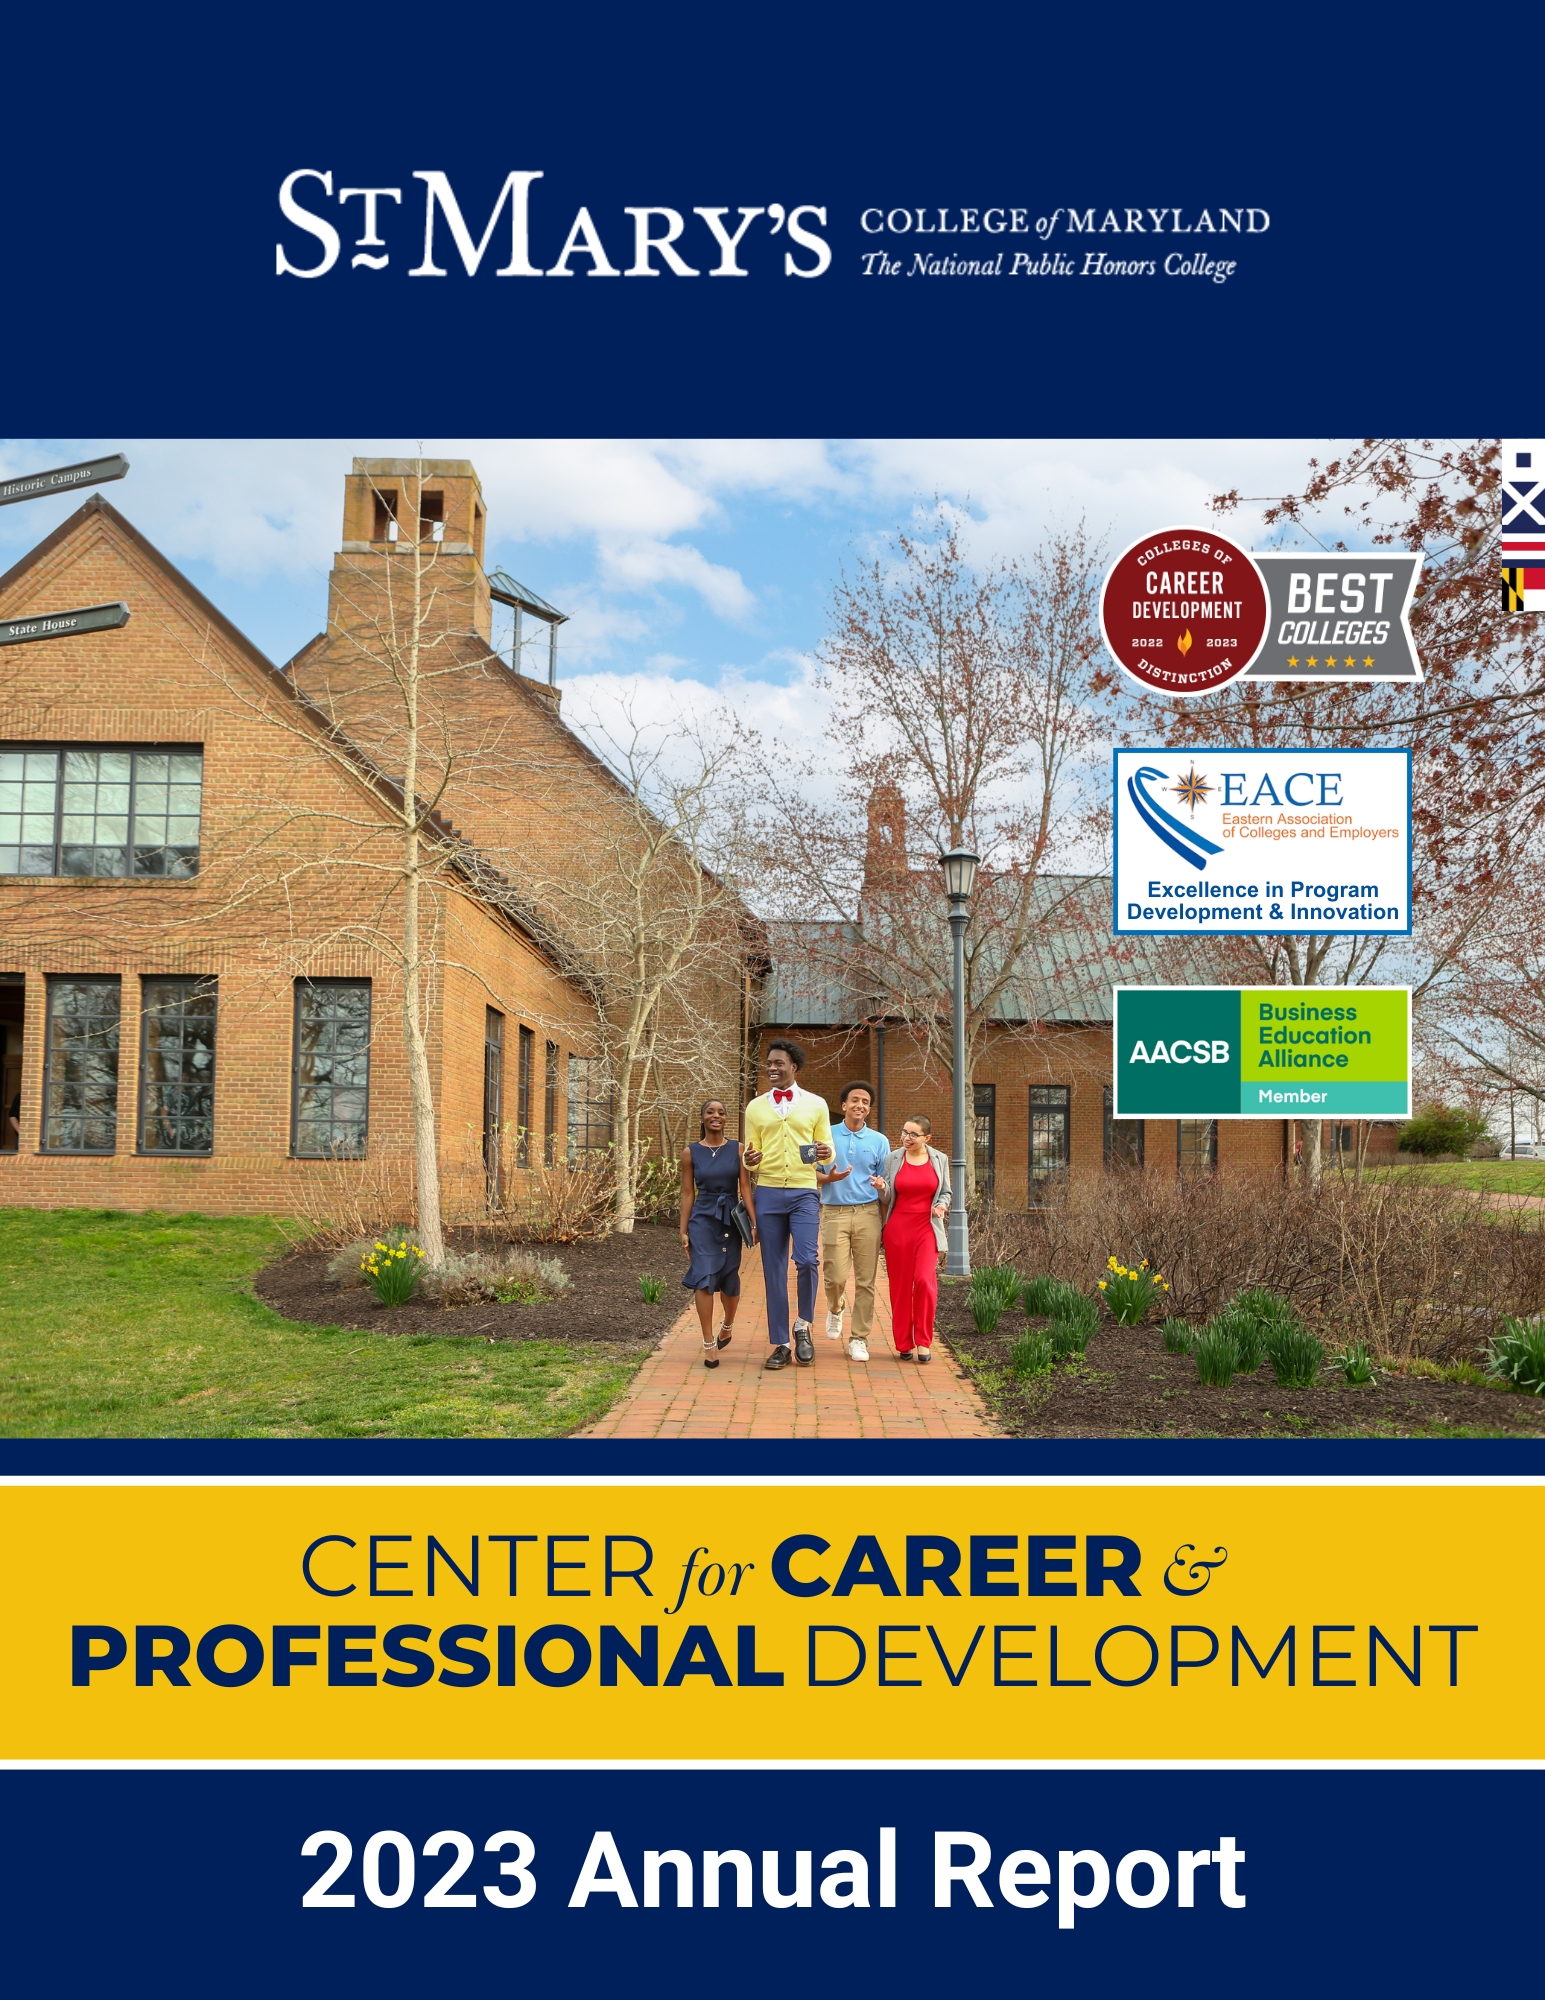 2023 Annual Report - Center for Career & Professional Development at St. Mary's College of Maryland